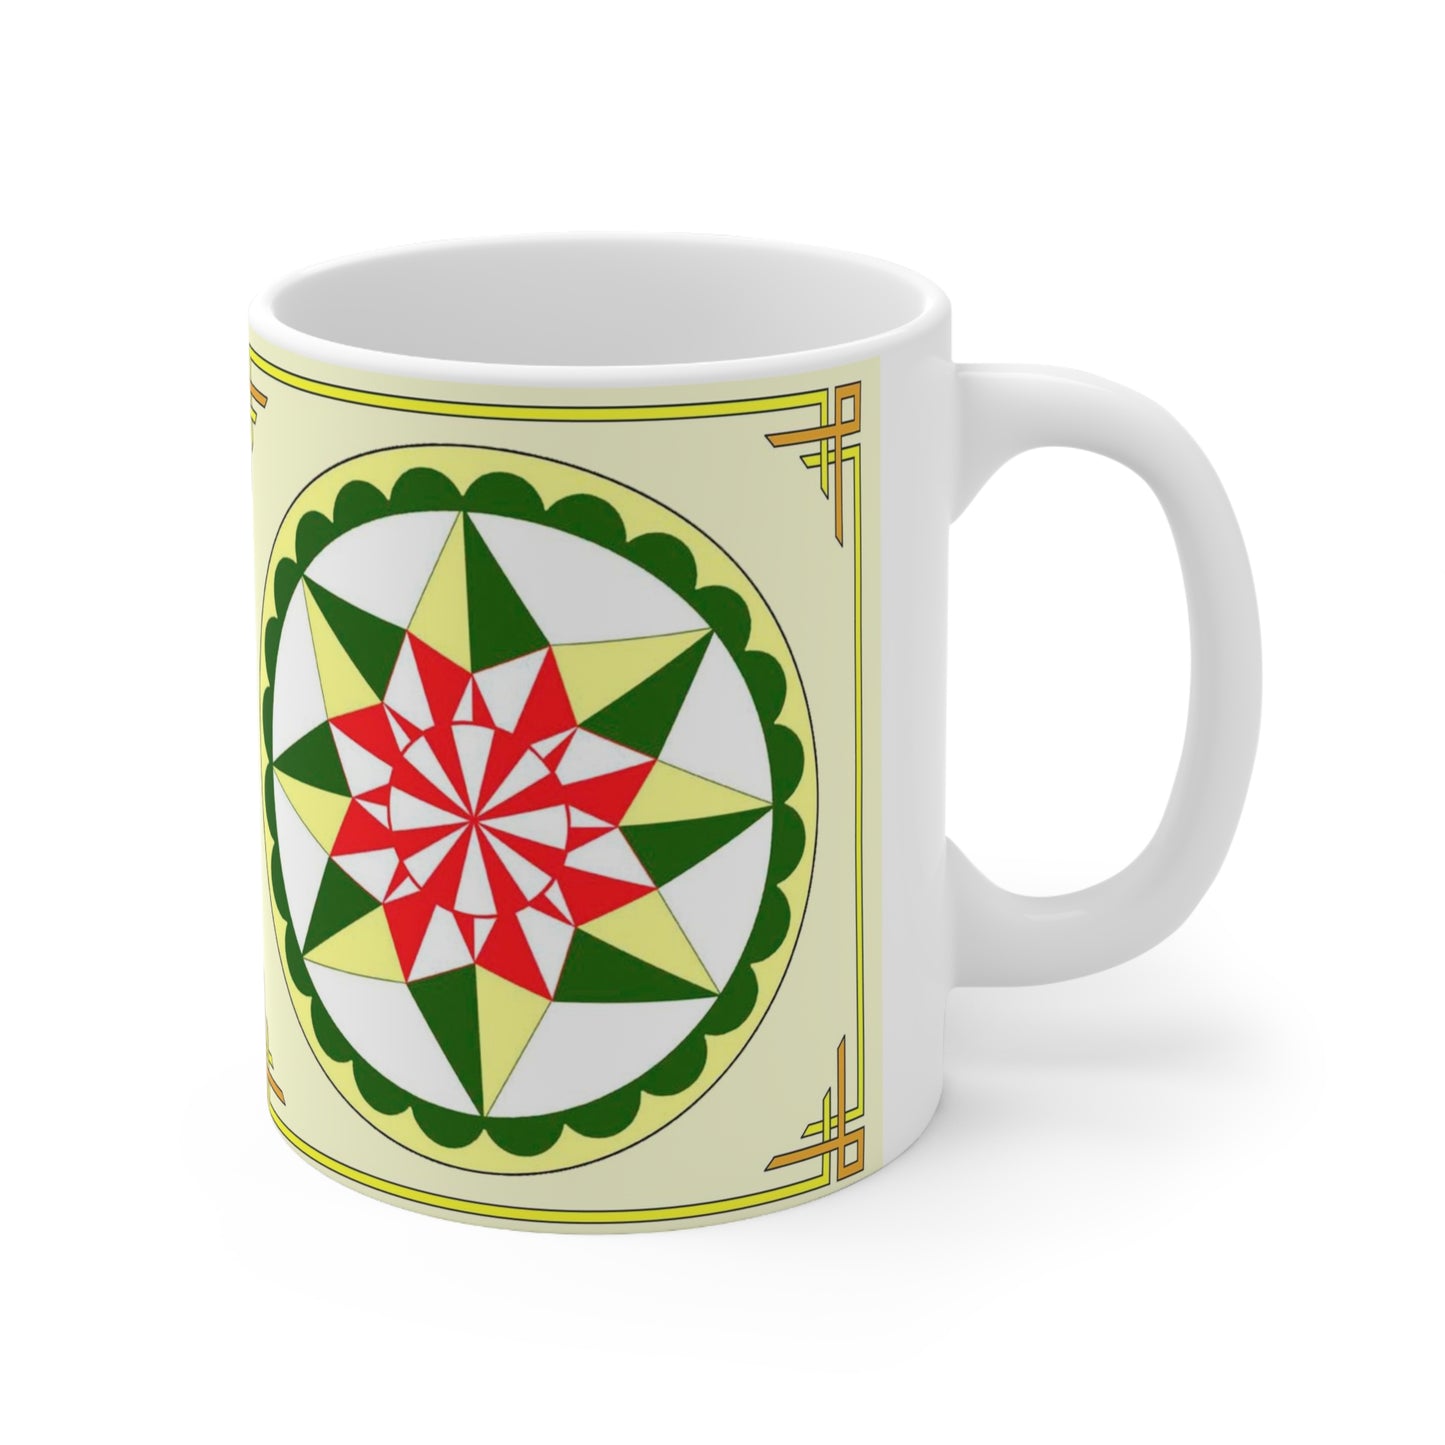 The Morning Star Folk Art Design is a reproduction of a fine art design by artist Lee M. Buchanan. Morning Star is based on a traditional 8 point star design and includes scalloping on the interior circular edges. The bright colors suggest morning and the top point of the star is at the traditional 12 o'clock position.